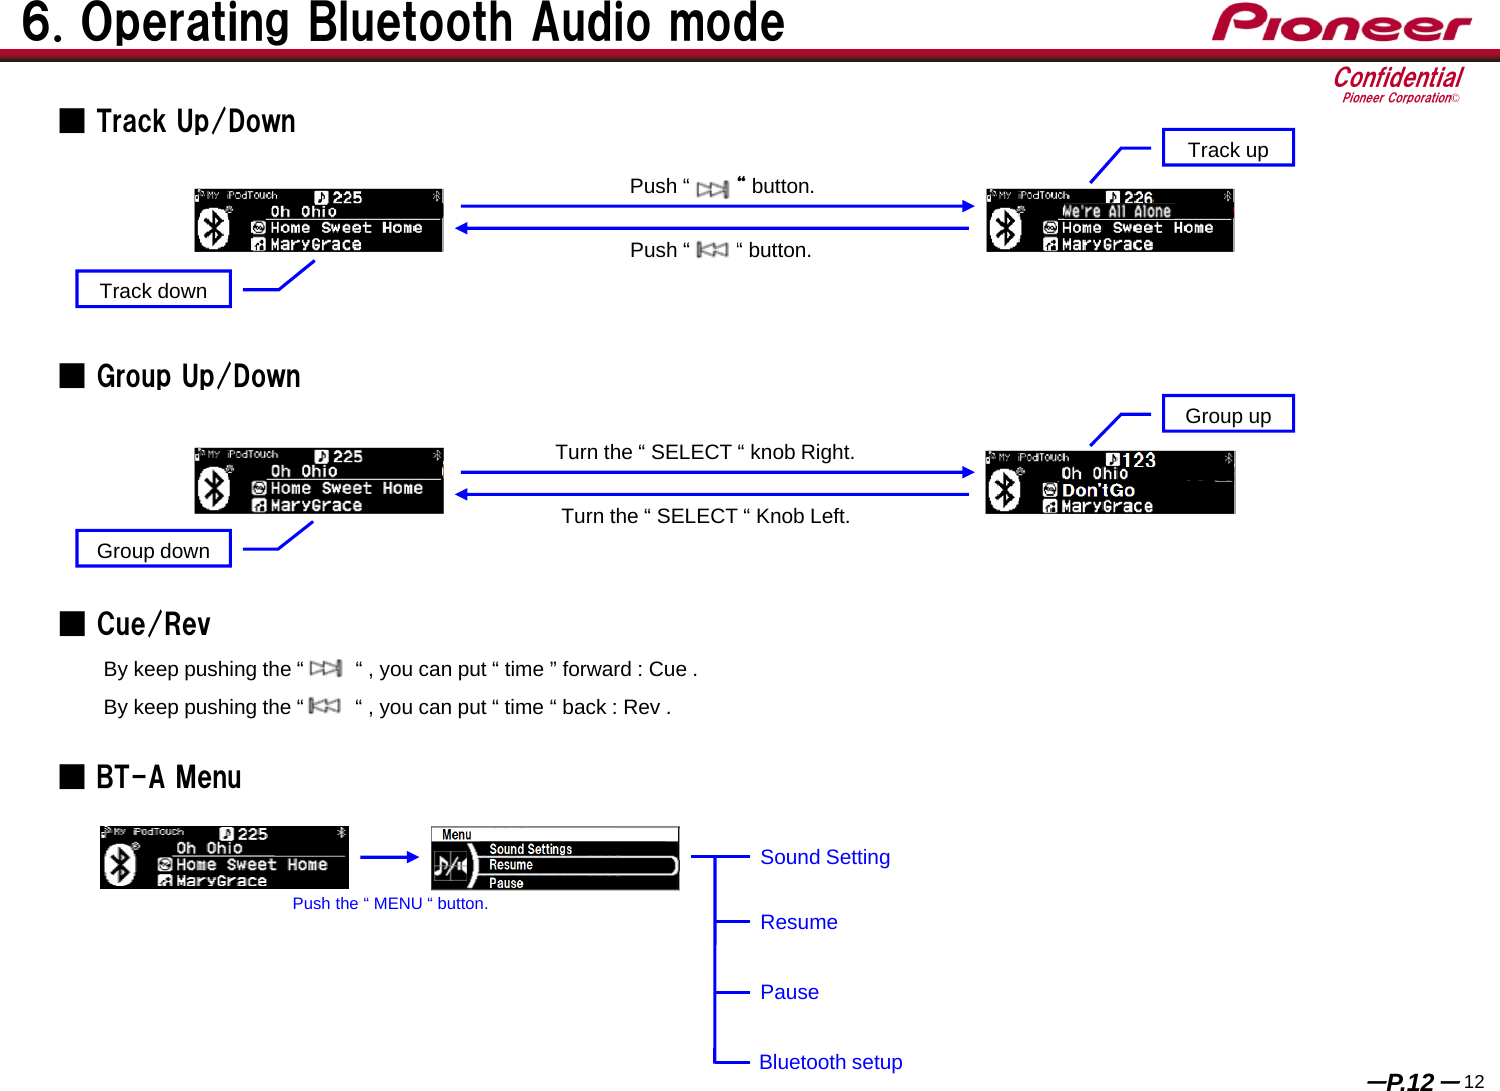 ConfidentialPioneer Corporation©Push “        “button.Push “        “ button.By keep pushing the “         “ , you can put “ time ” forward : Cue .By keep pushing the “         “ , you can put “ time “ back : Rev . 126. Operating Bluetooth Audio mode－P.12－■Track Up/Down■Cue/RevTrack upTrack downTurn the “ SELECT “ knob Right.Turn the “ SELECT “ Knob Left.■ Group Up/DownGroup upGroup down■ BT-A MenuPush the “ MENU “ button.Sound SettingResumePauseBluetooth setup